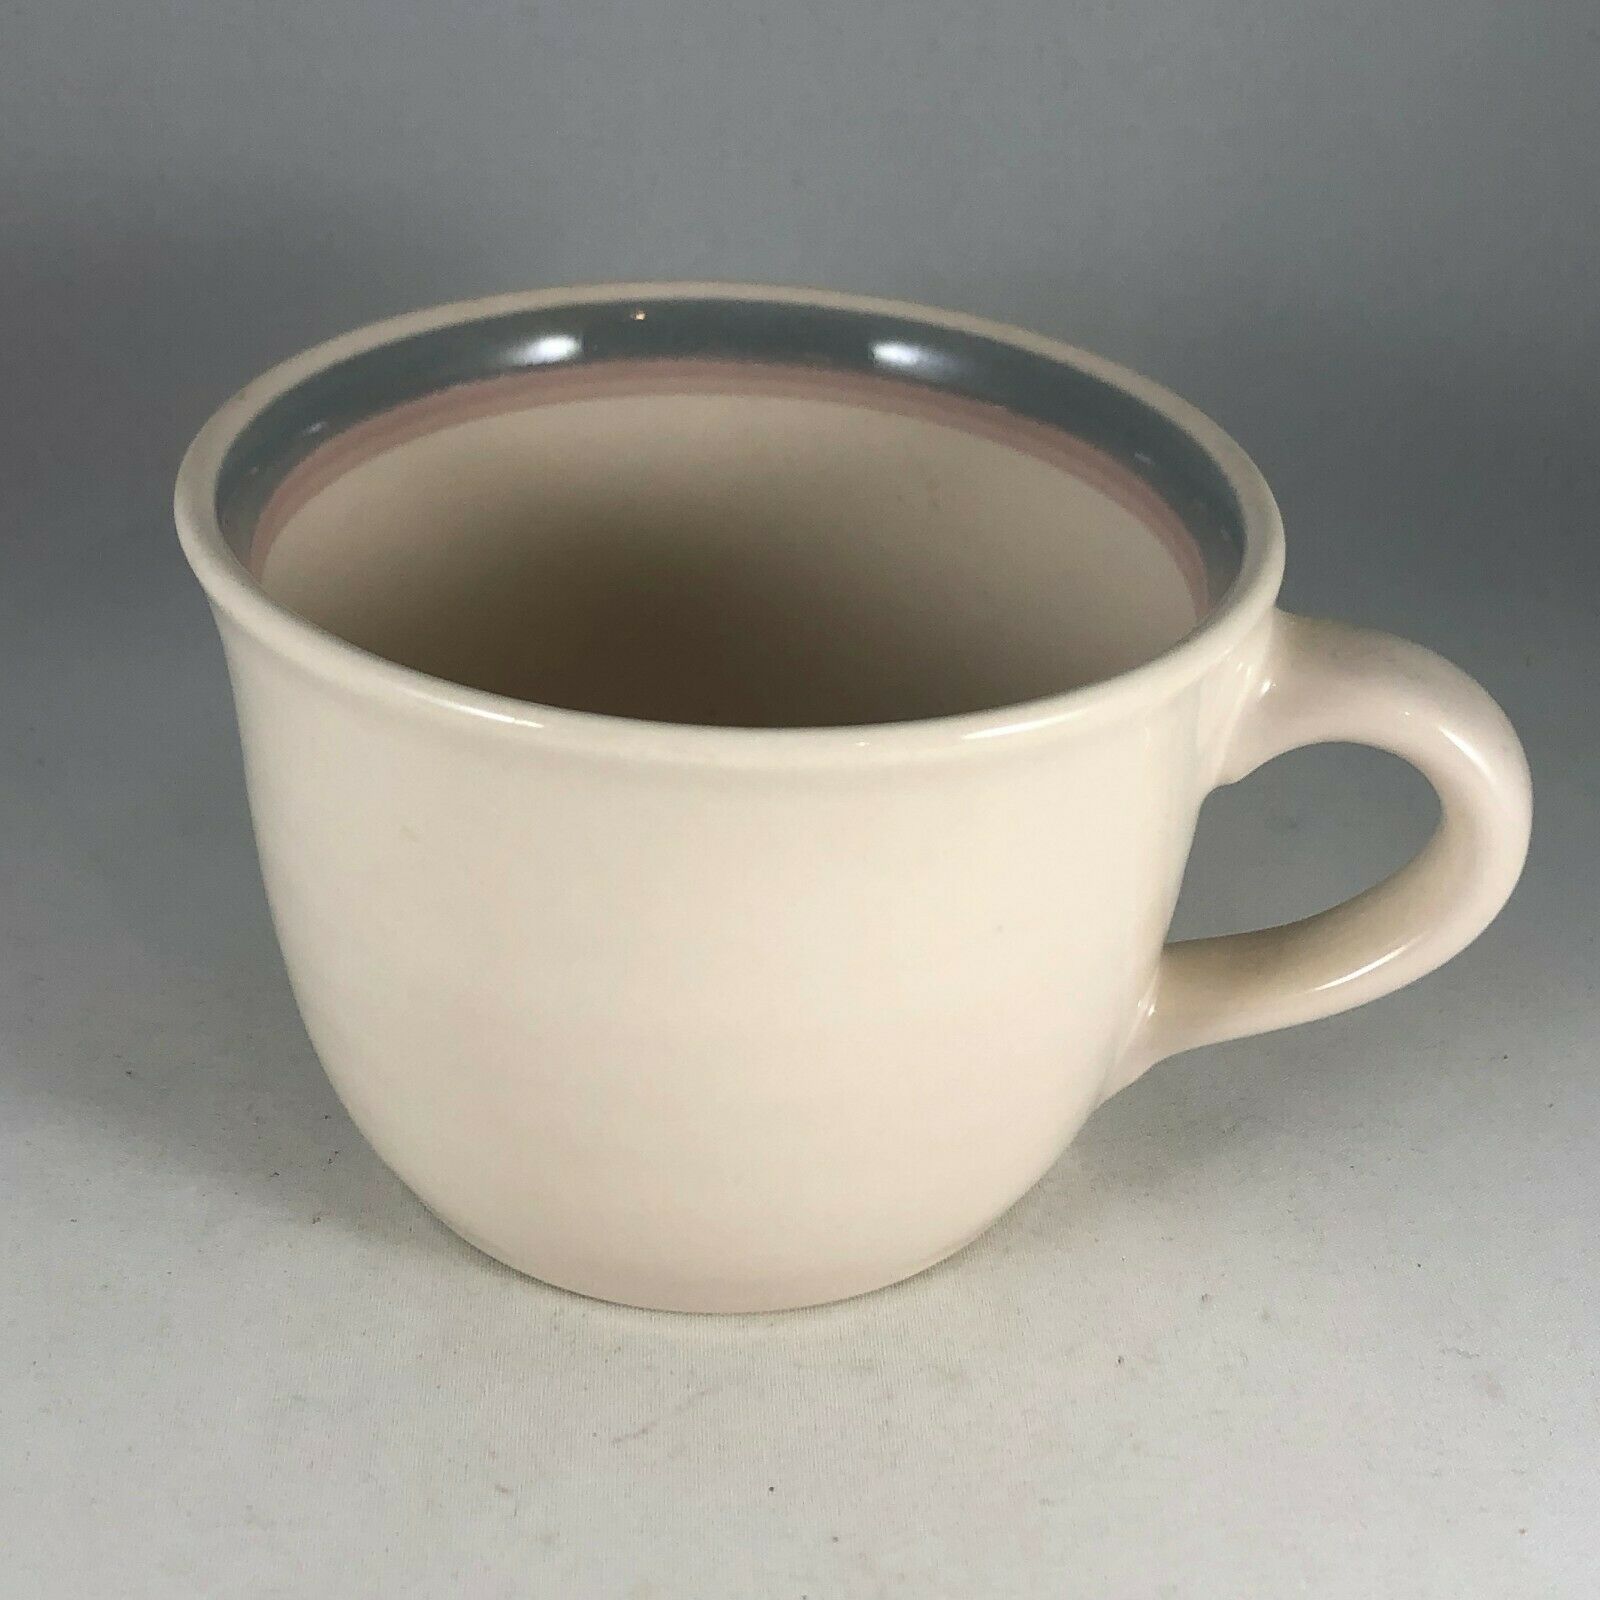 Primary image for Pfaltzgraff Juniper Coffee Mug - Multiple Available